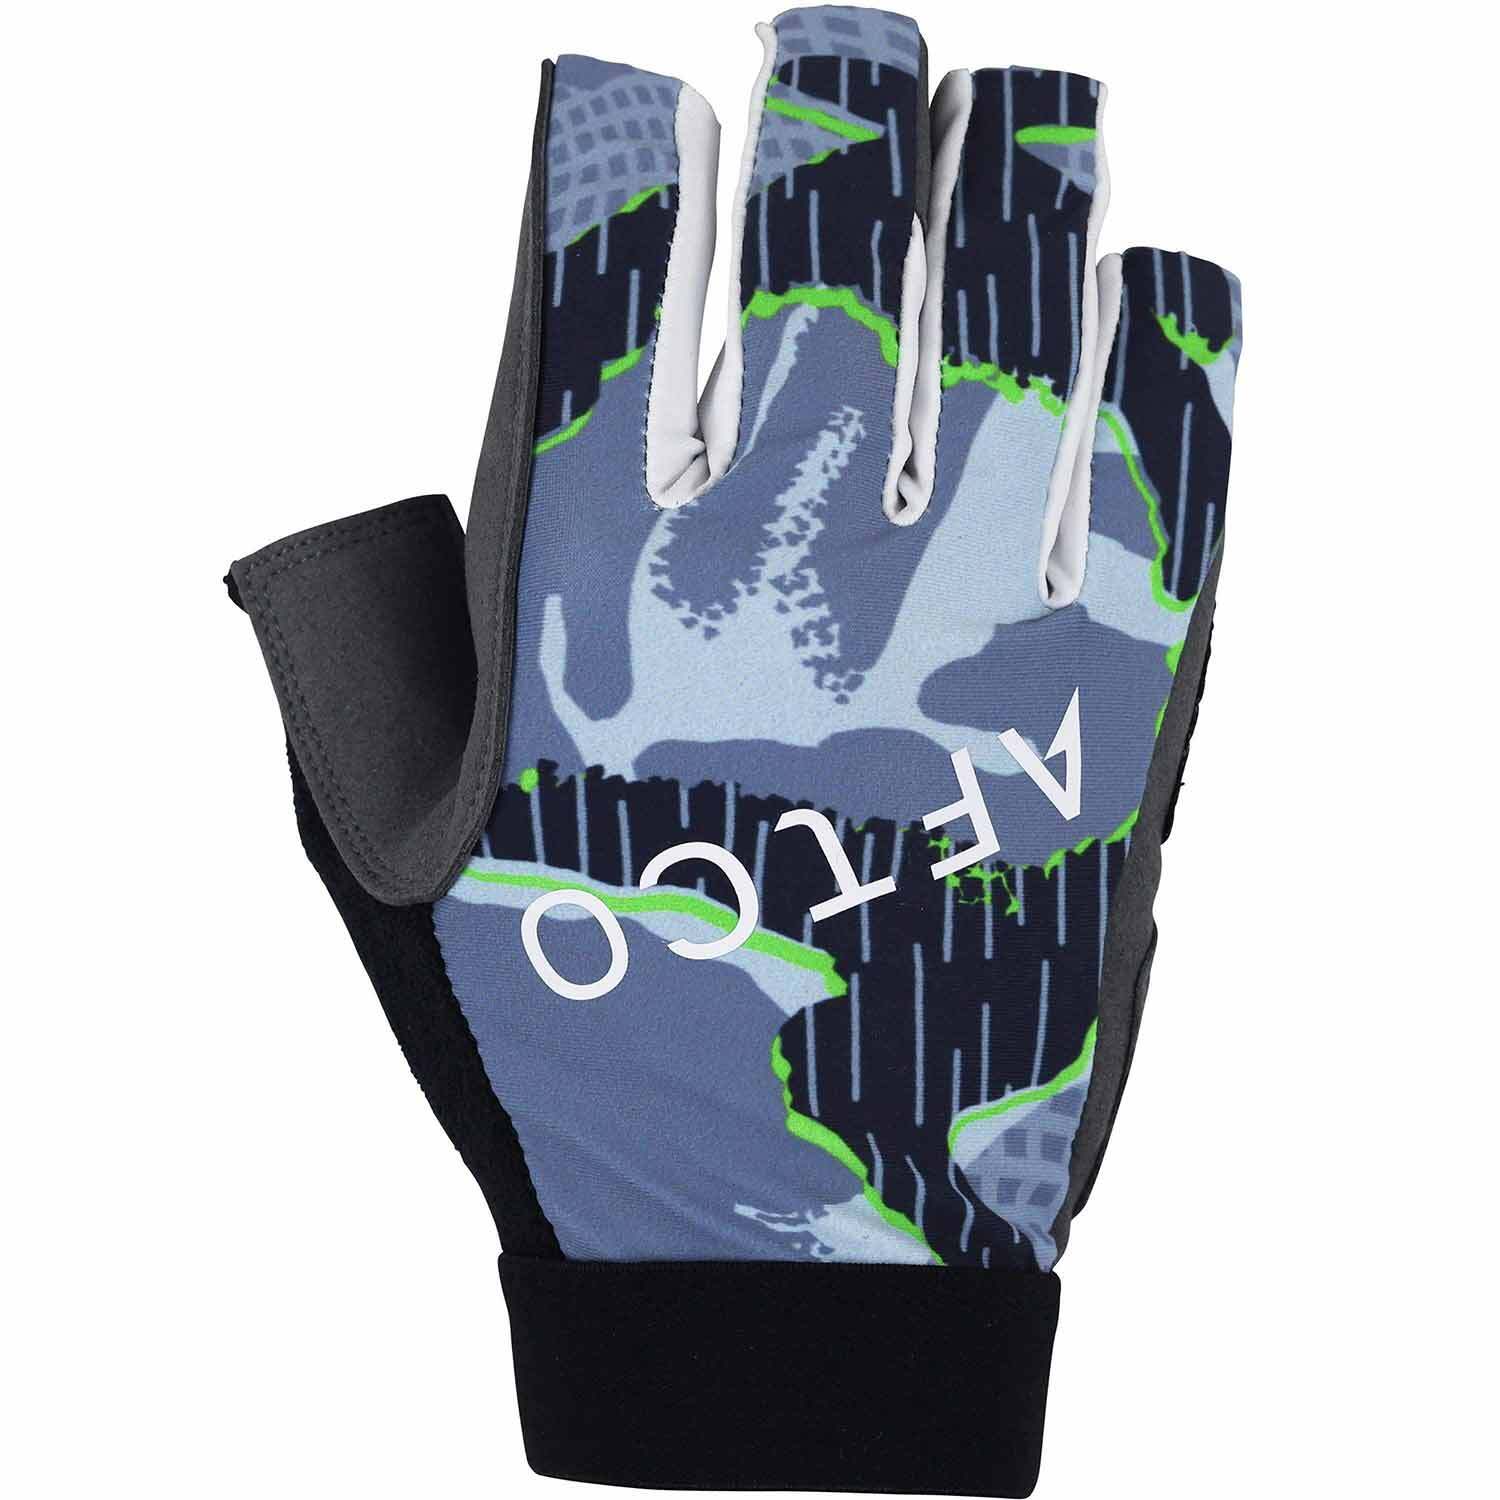 AFTCO Solmar Fishing Gloves, Large